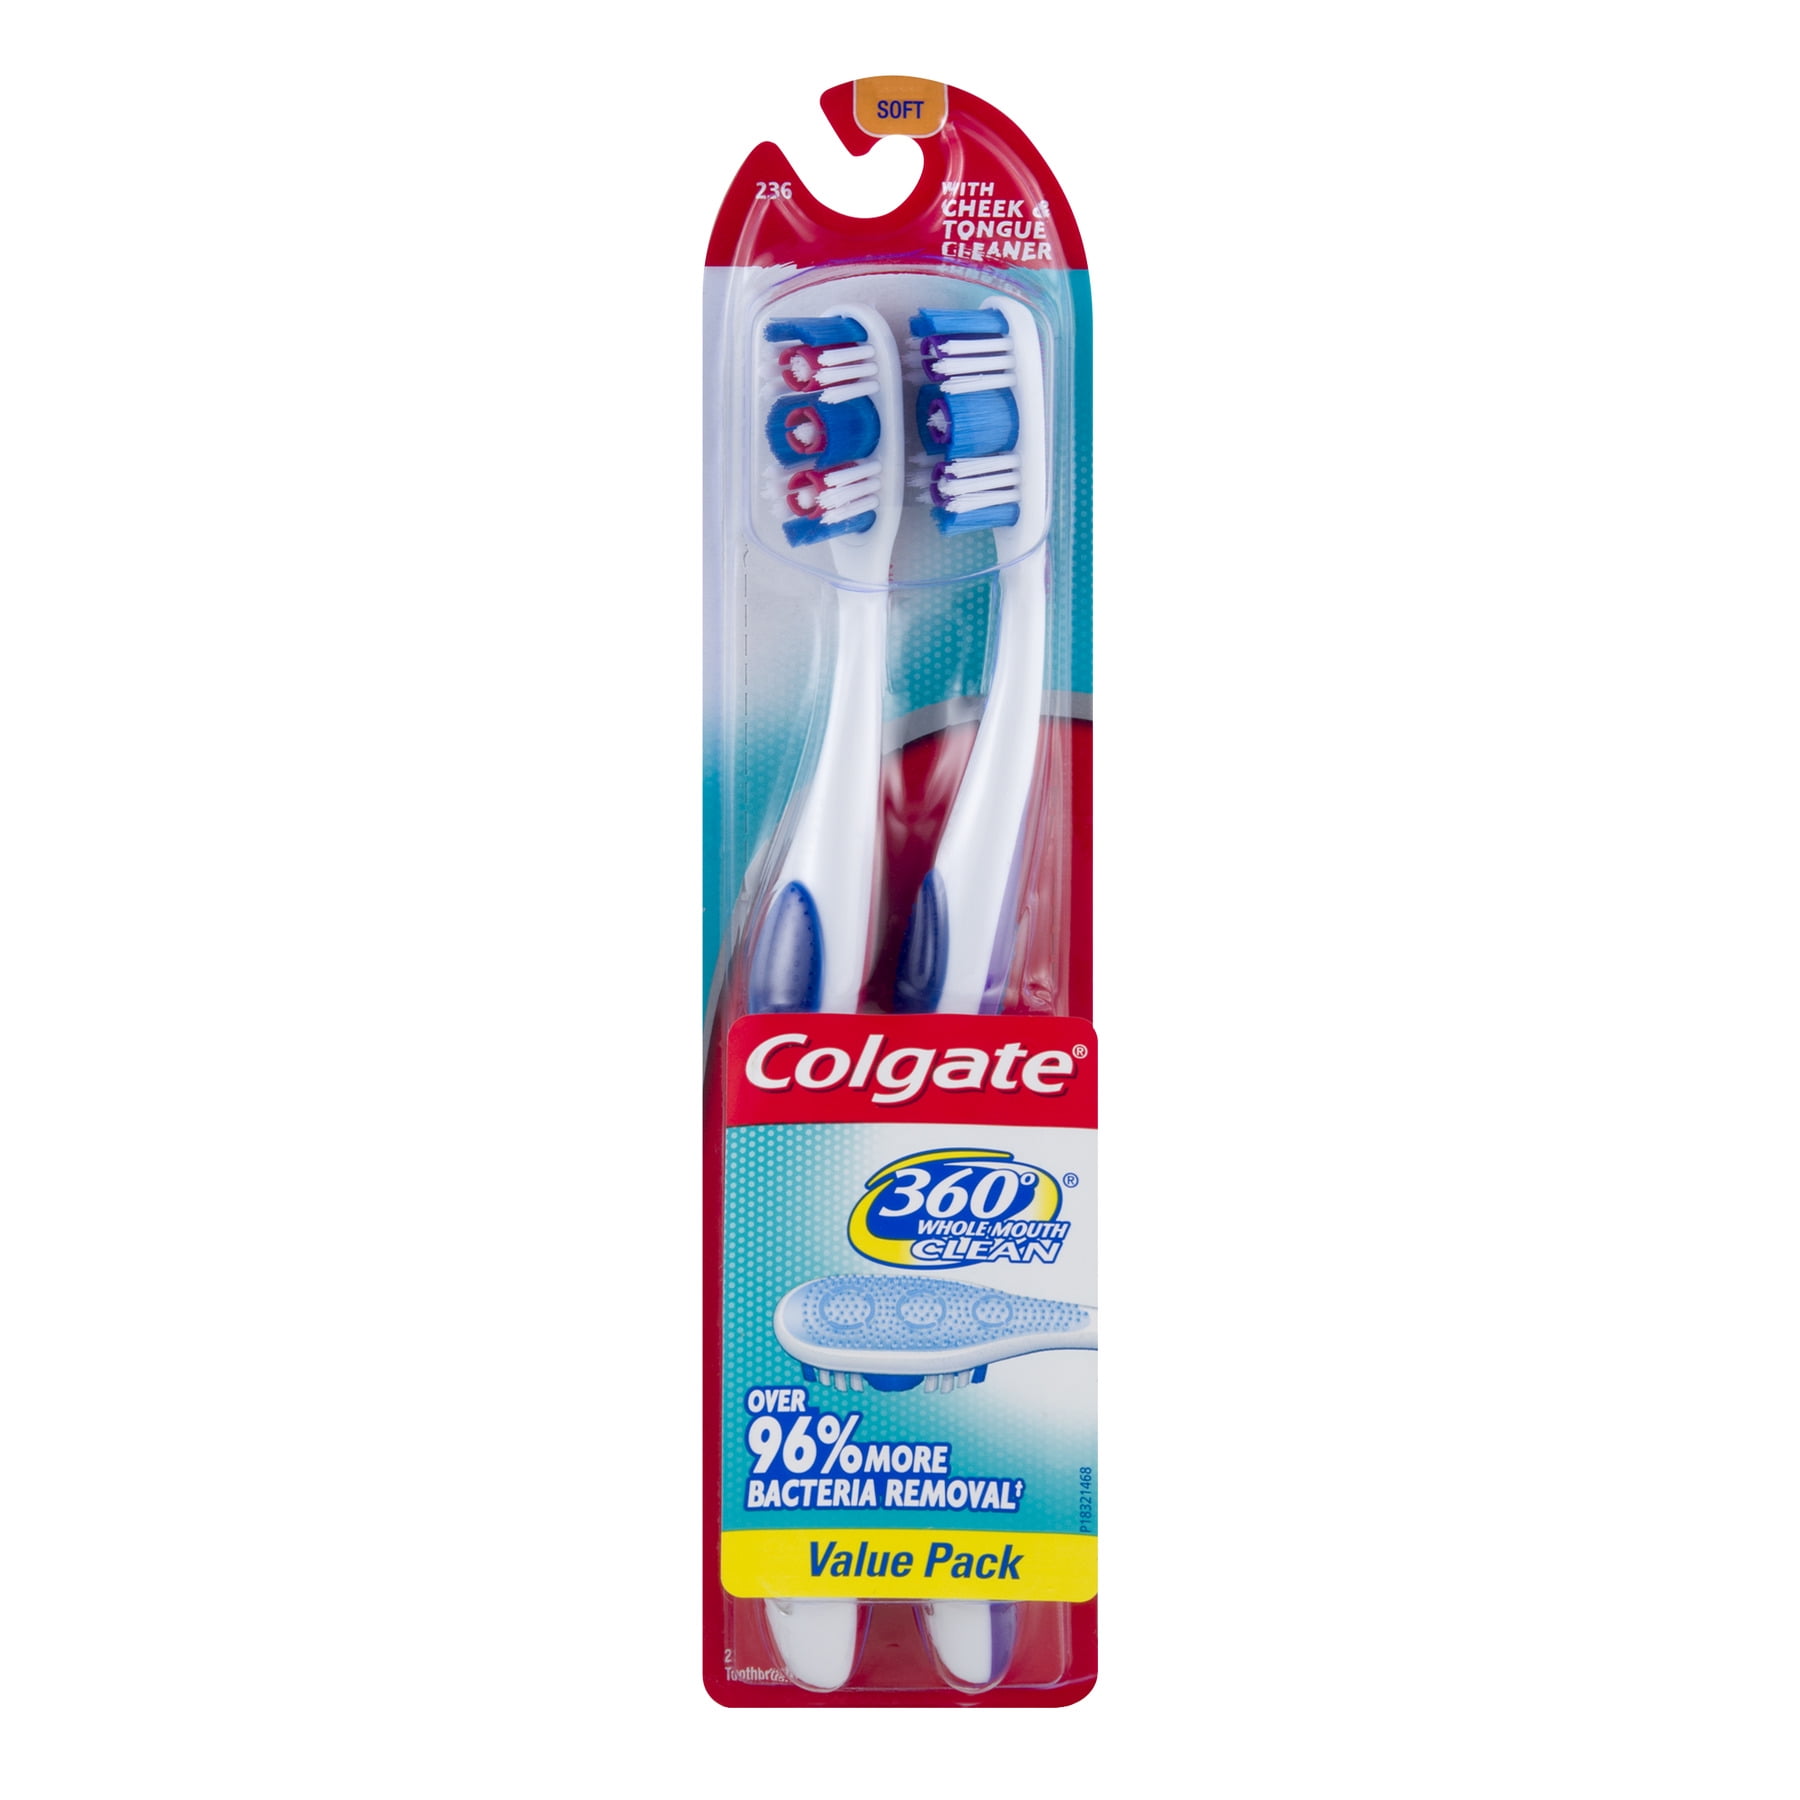 Colgate 360 Manual Toothbrush with Tongue and Cheek Cleaner, Soft, 2 Count